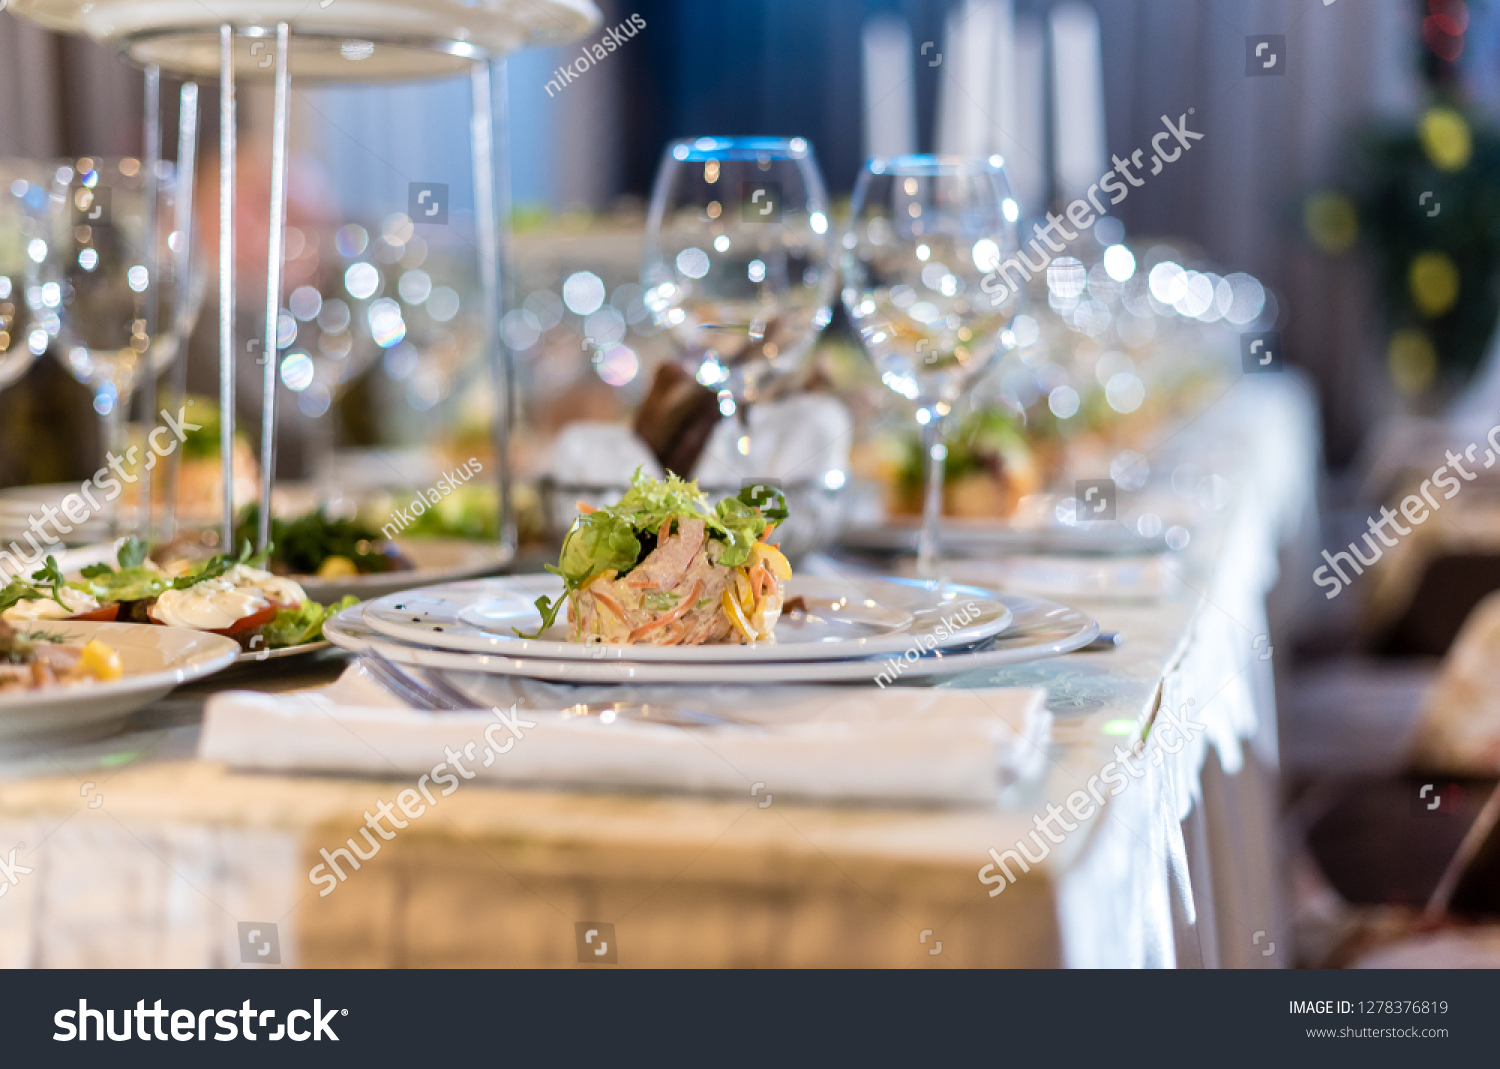 Serving dishes in the restaurant. luxury dinner served on the table #1278376819